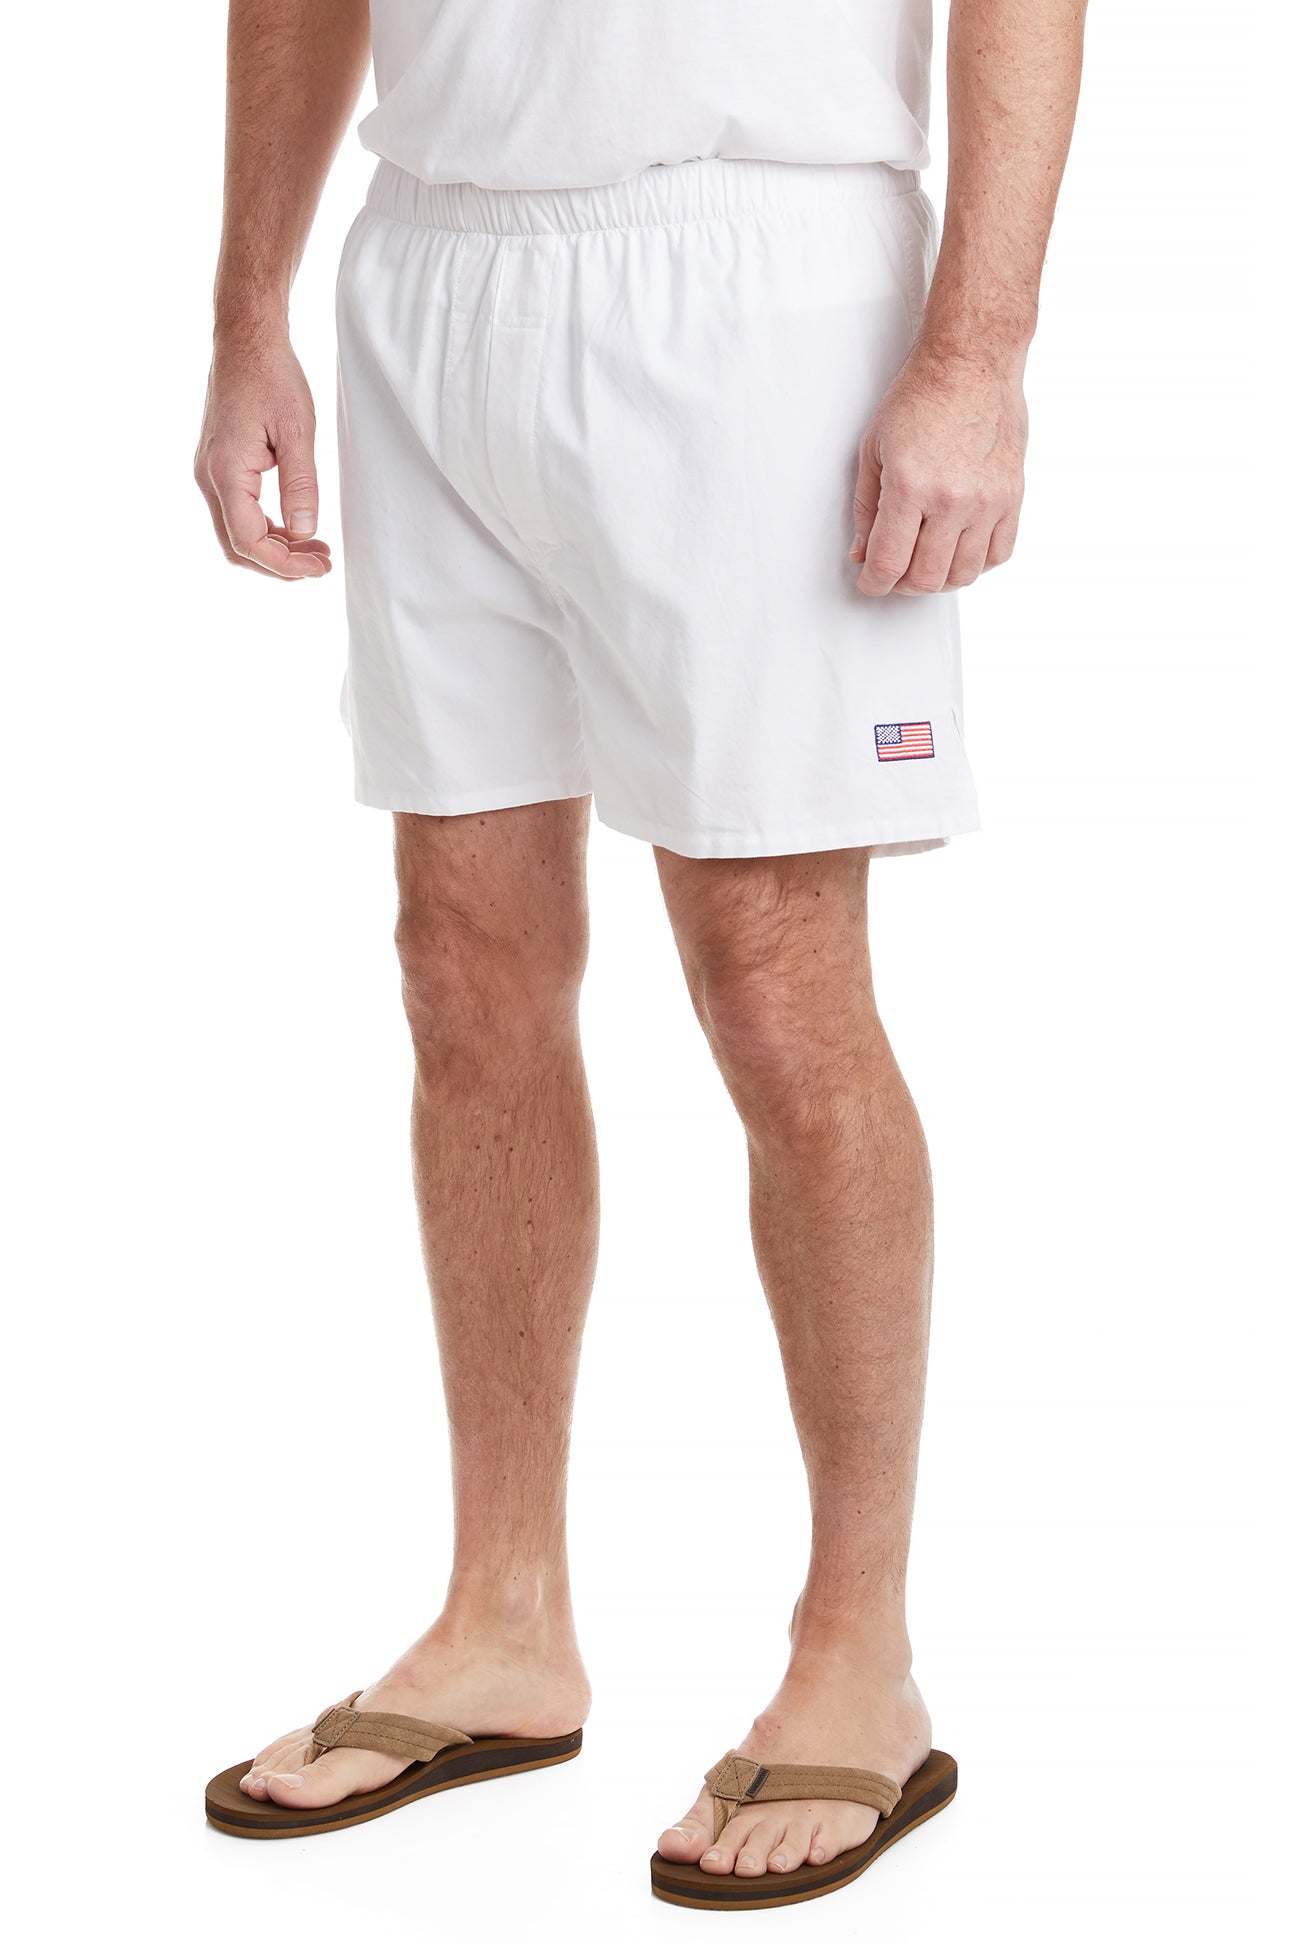 Barefoot Boxer White Oxford with Single American Flag CASTAWAY BOXERS Castaway Nantucket Island